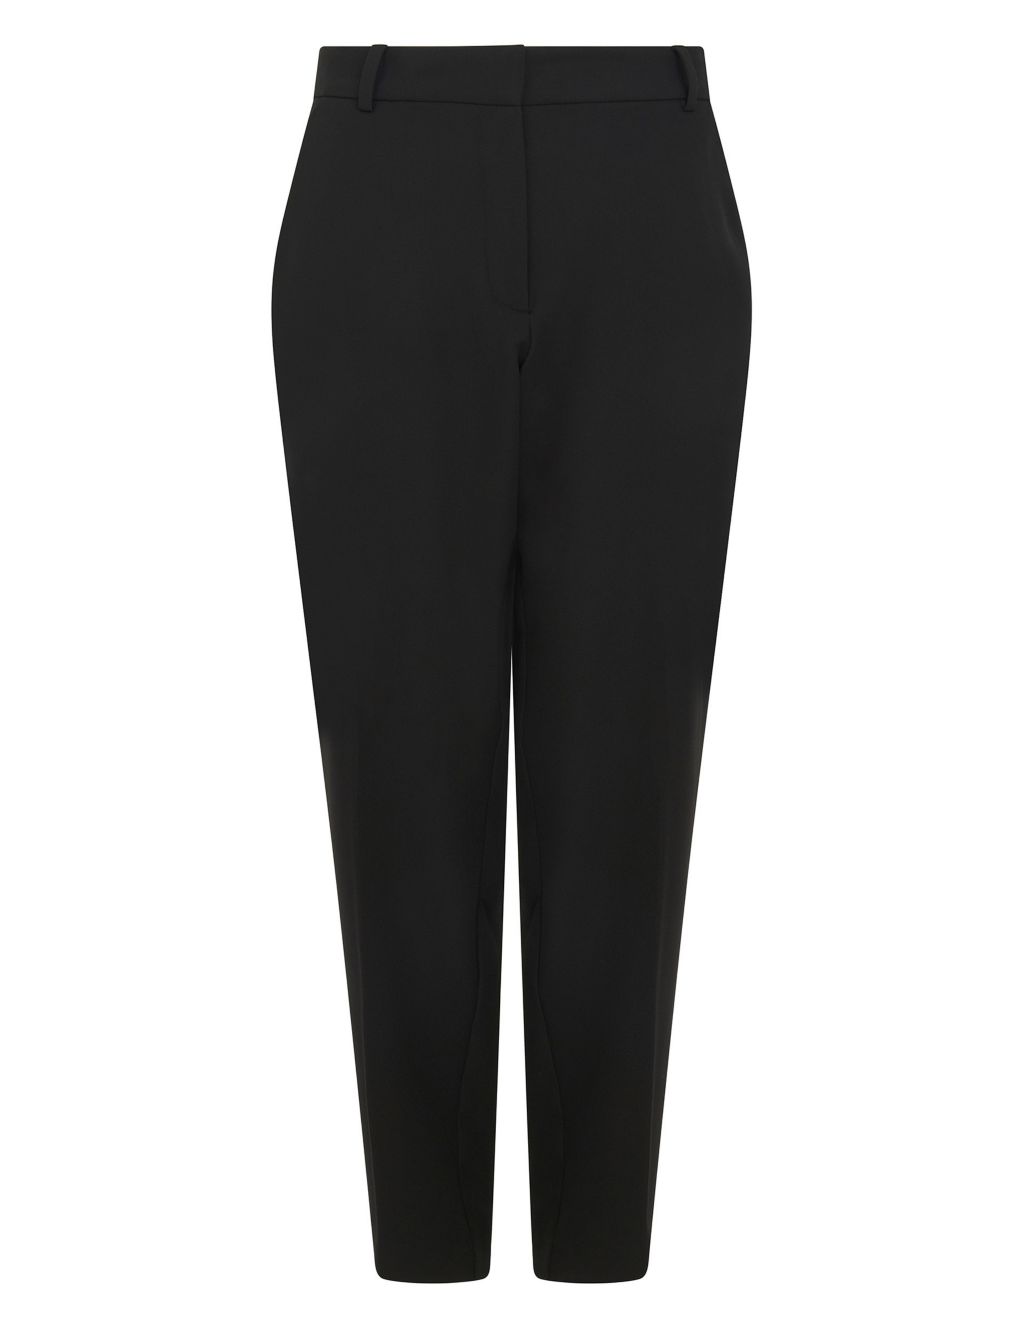 Buy Tapered Ankle Grazer Trousers | Finery London | M&S